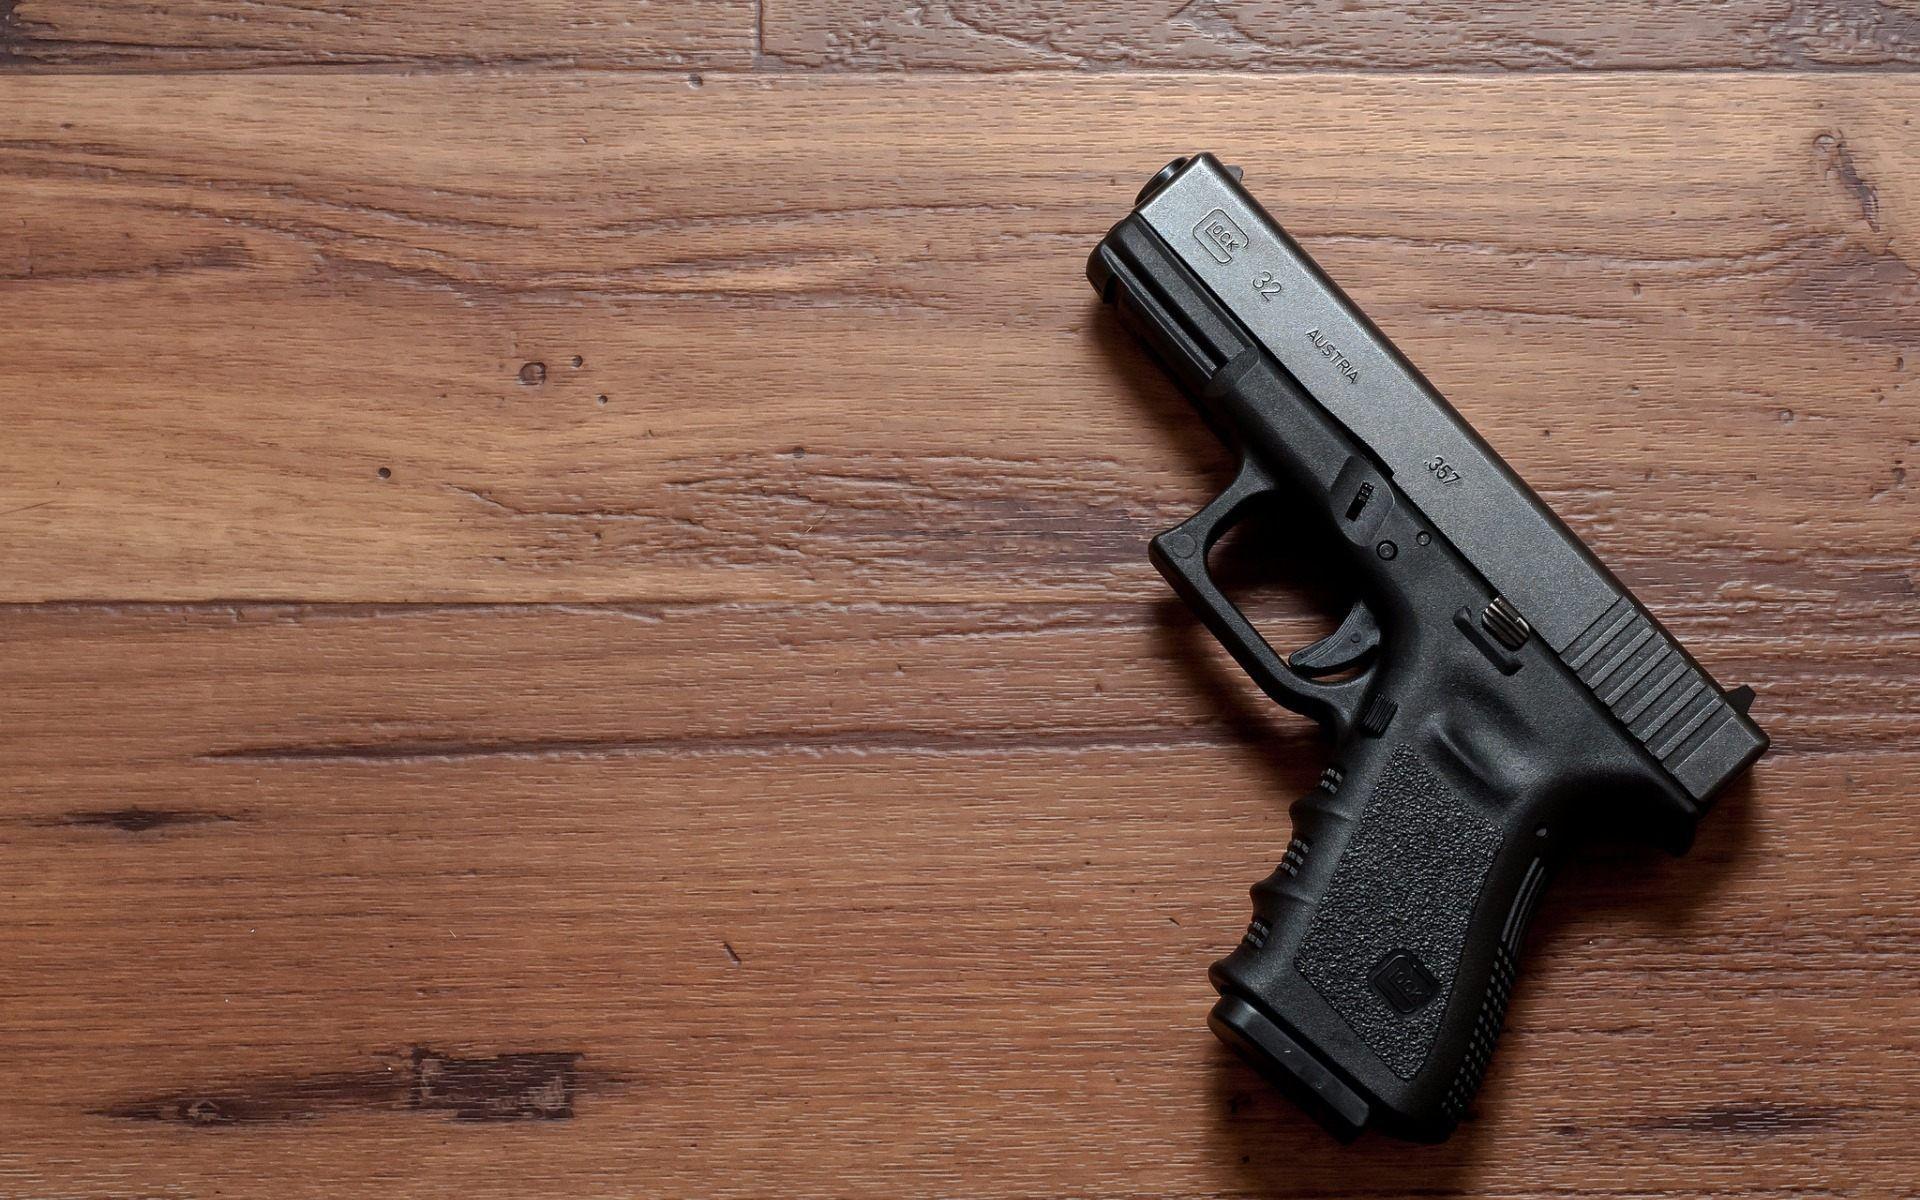 Glock Wallpapers, HD Quality Glock Wallpapers for Free, Photos